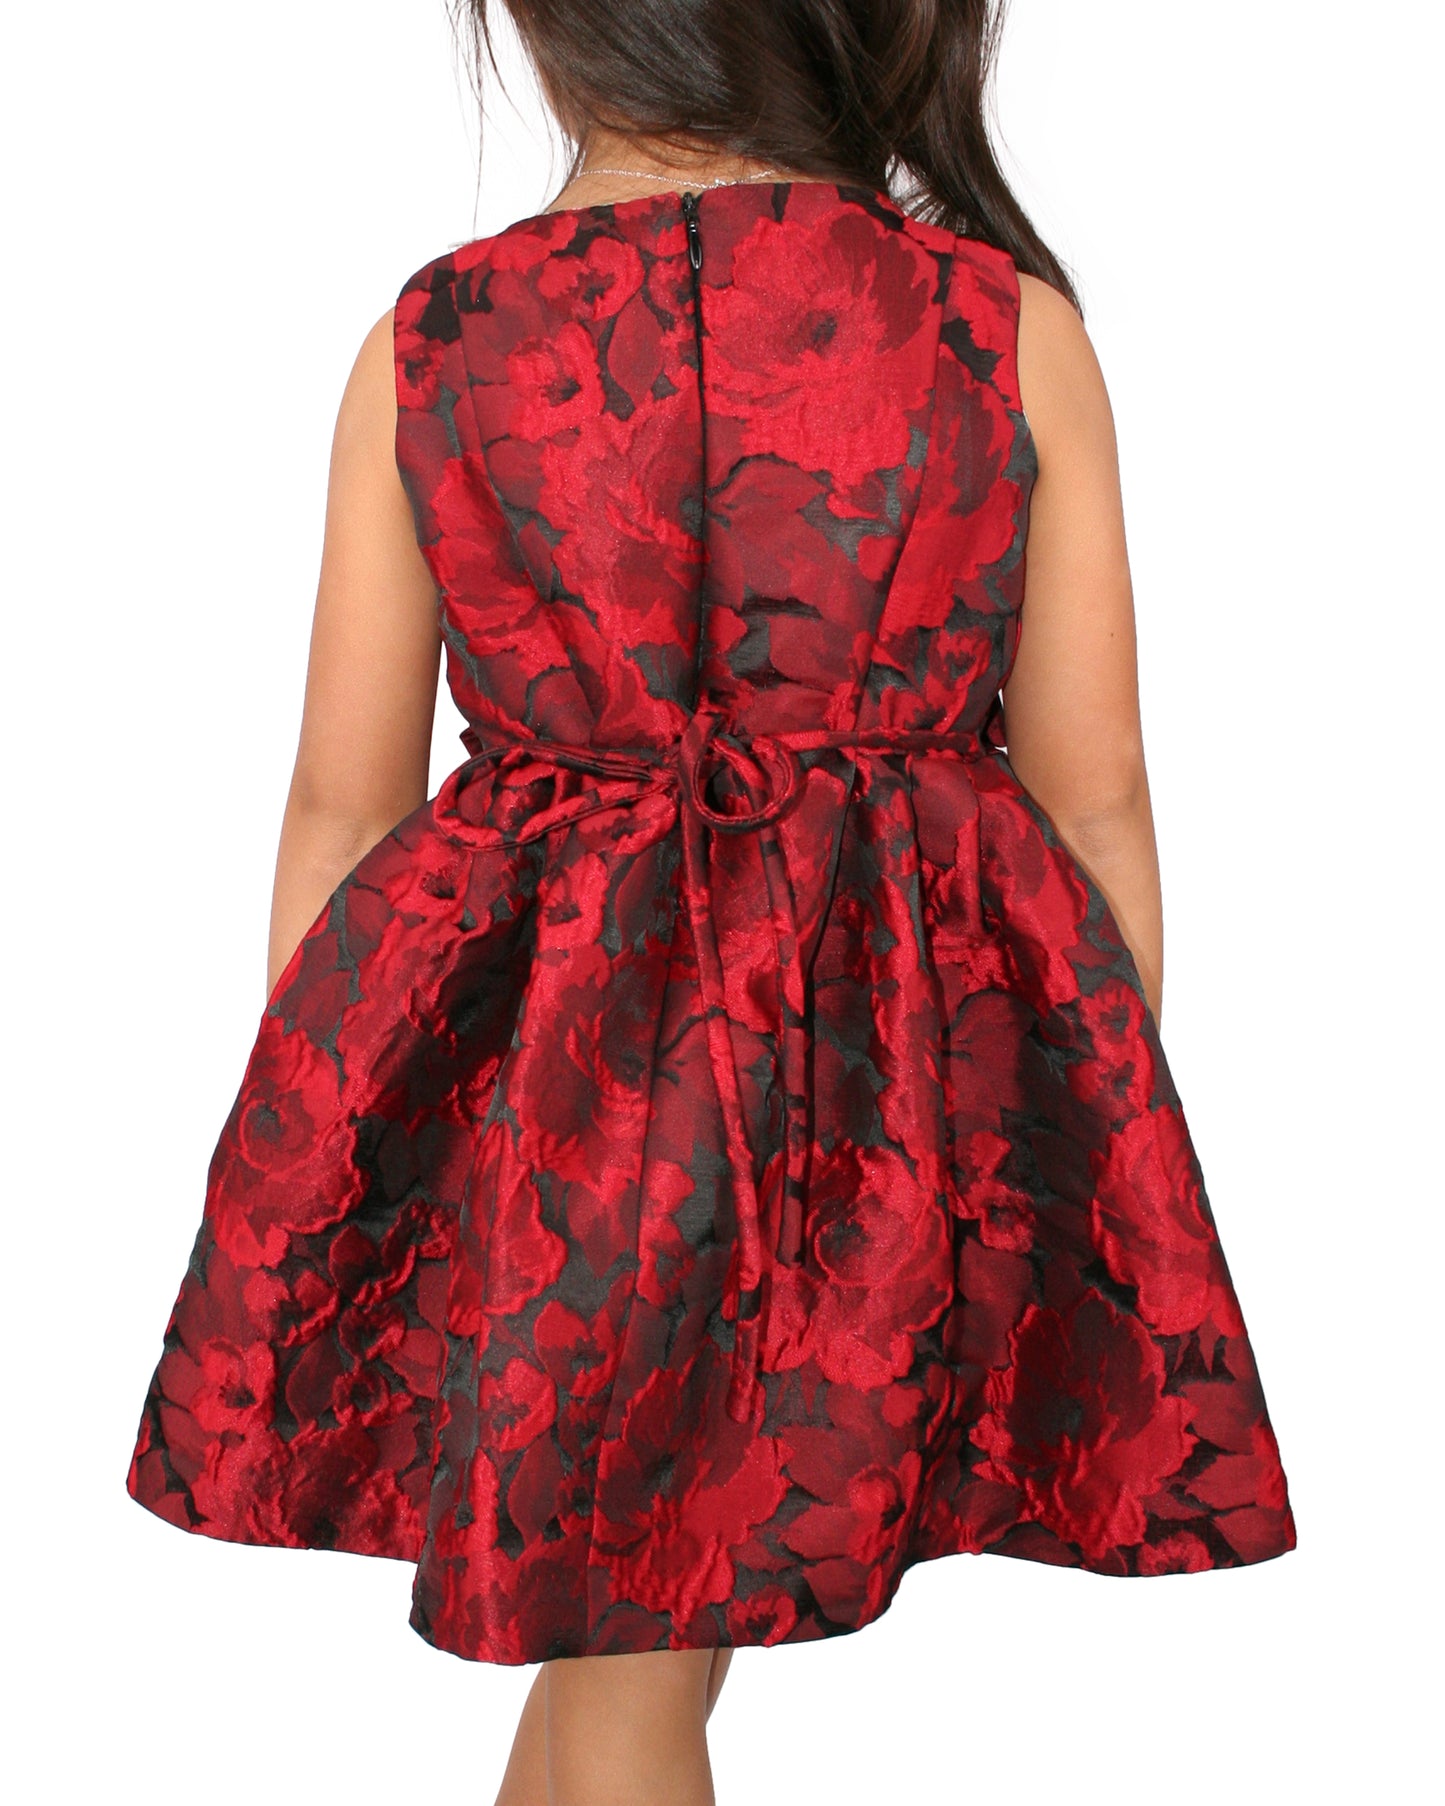 Helena and Harry Girl's Red Jacquard Dress